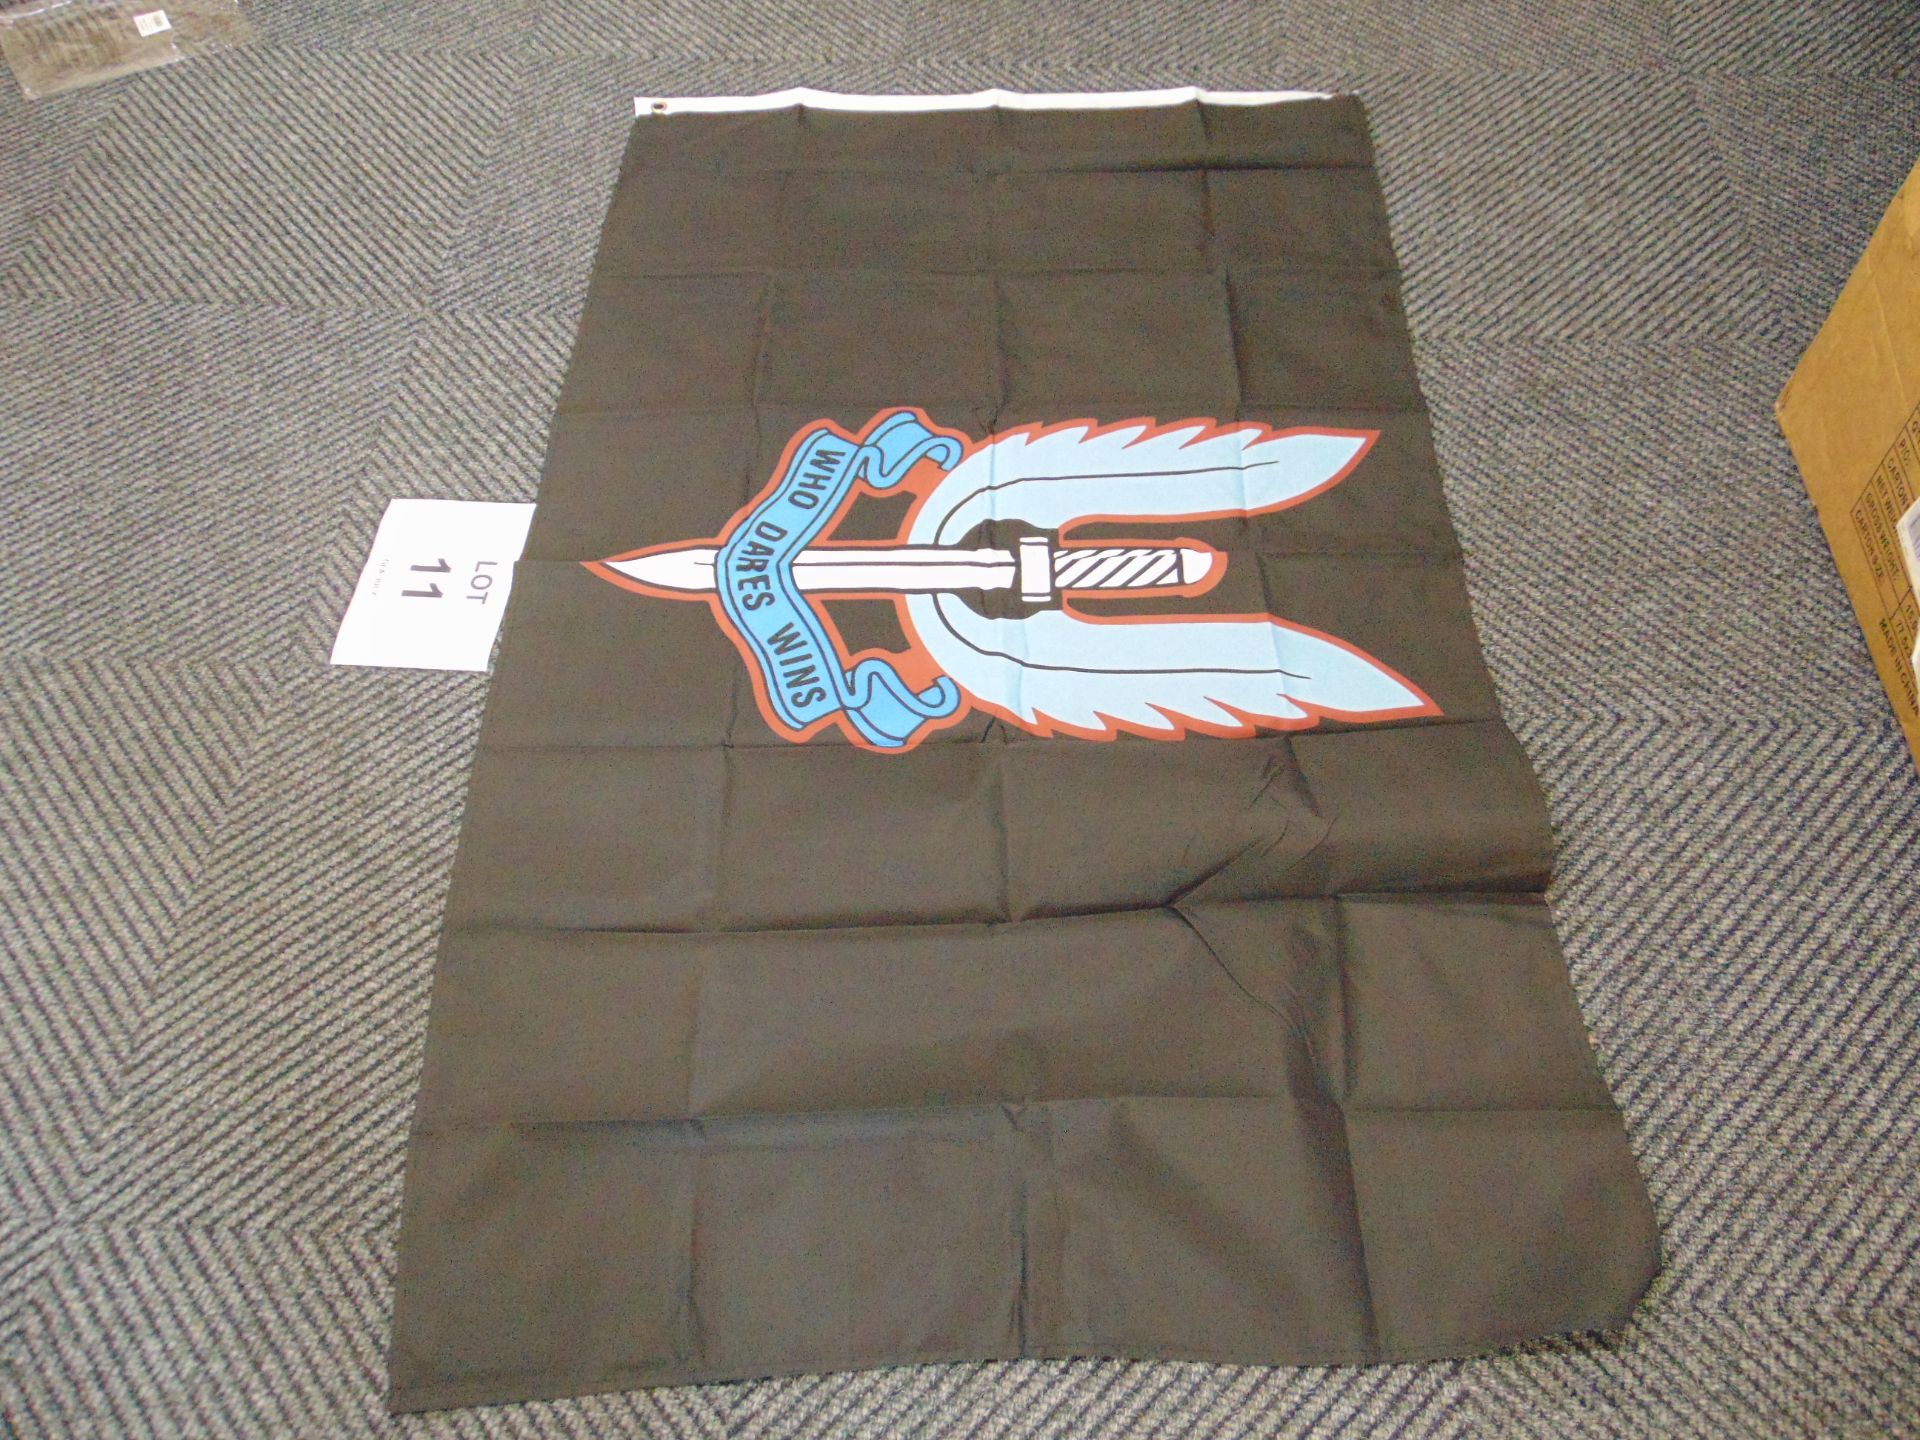 Special Air Service Black Flag, 5ft x 3ft - Image 3 of 3